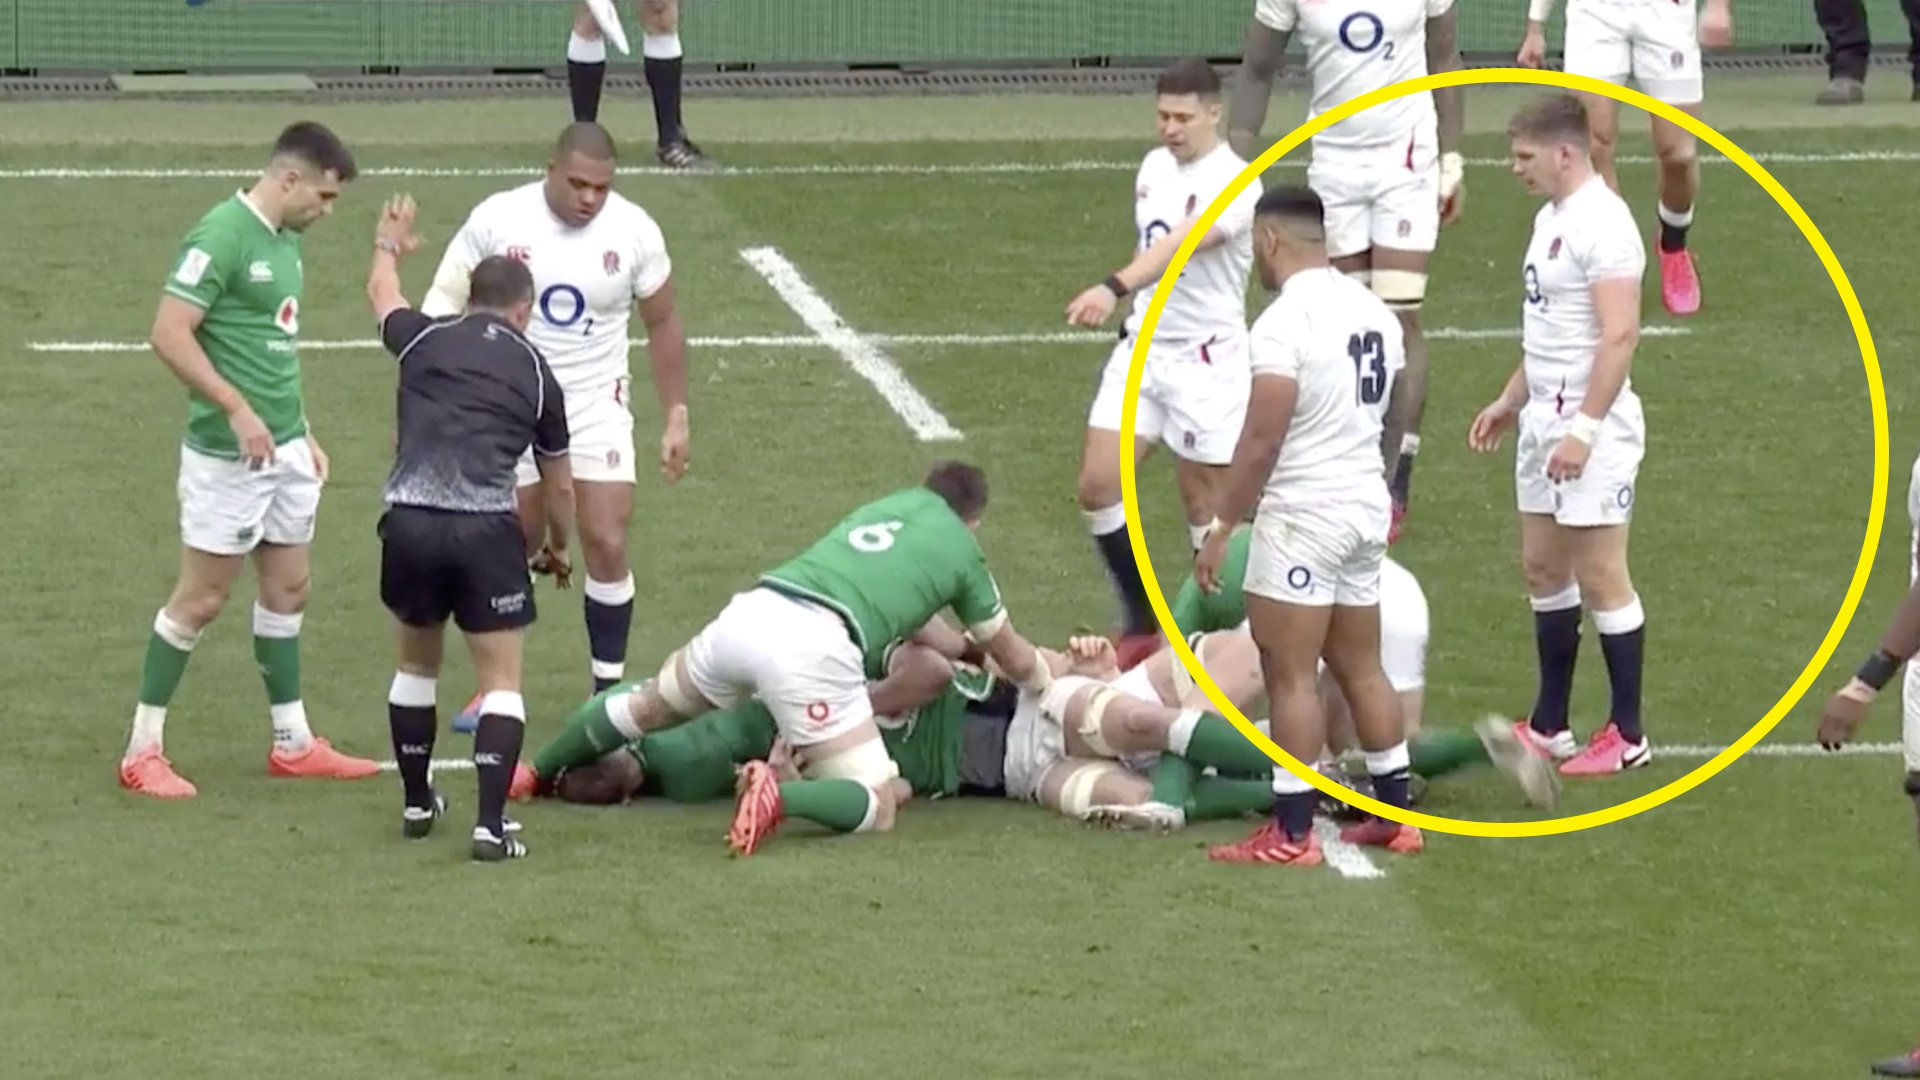 Owen Farrell's reaction when he saw Jordan Larmour was injured tells you everything about what he's really like